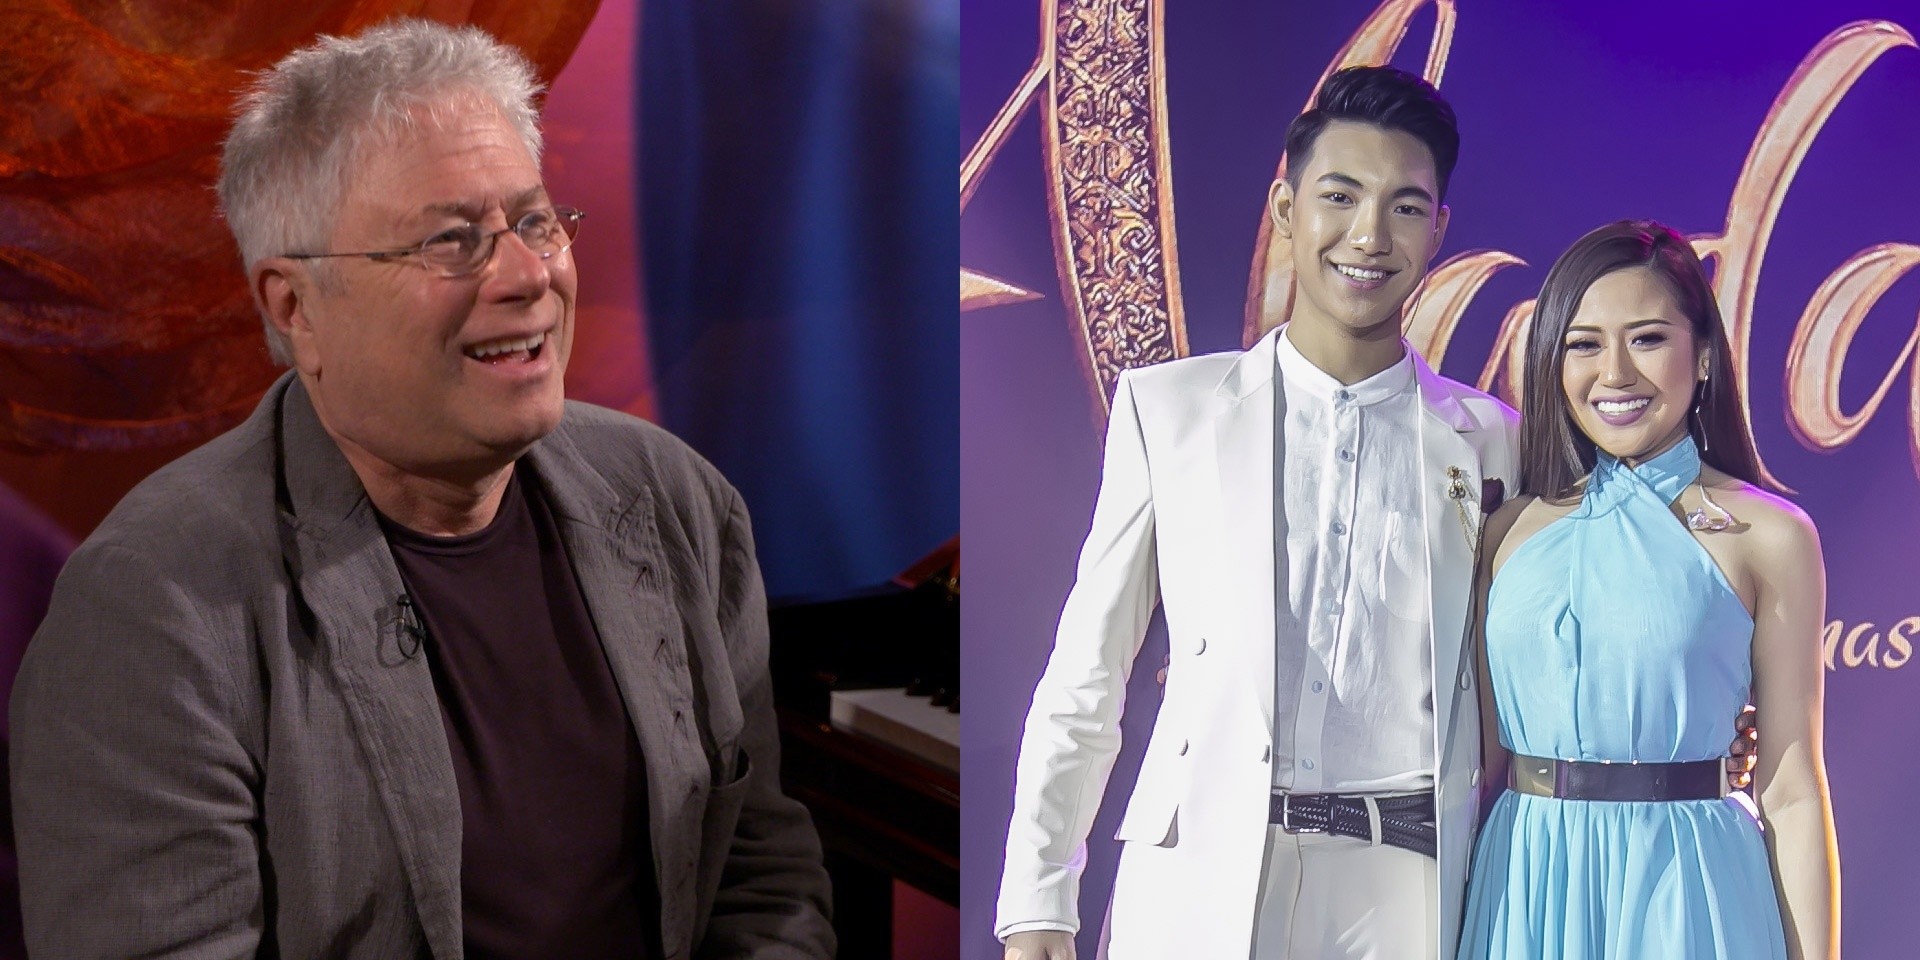 "You guys did such an amazing job": Alan Menken on Morissette and Darren Espanto's take on 'A Whole New World' – watch